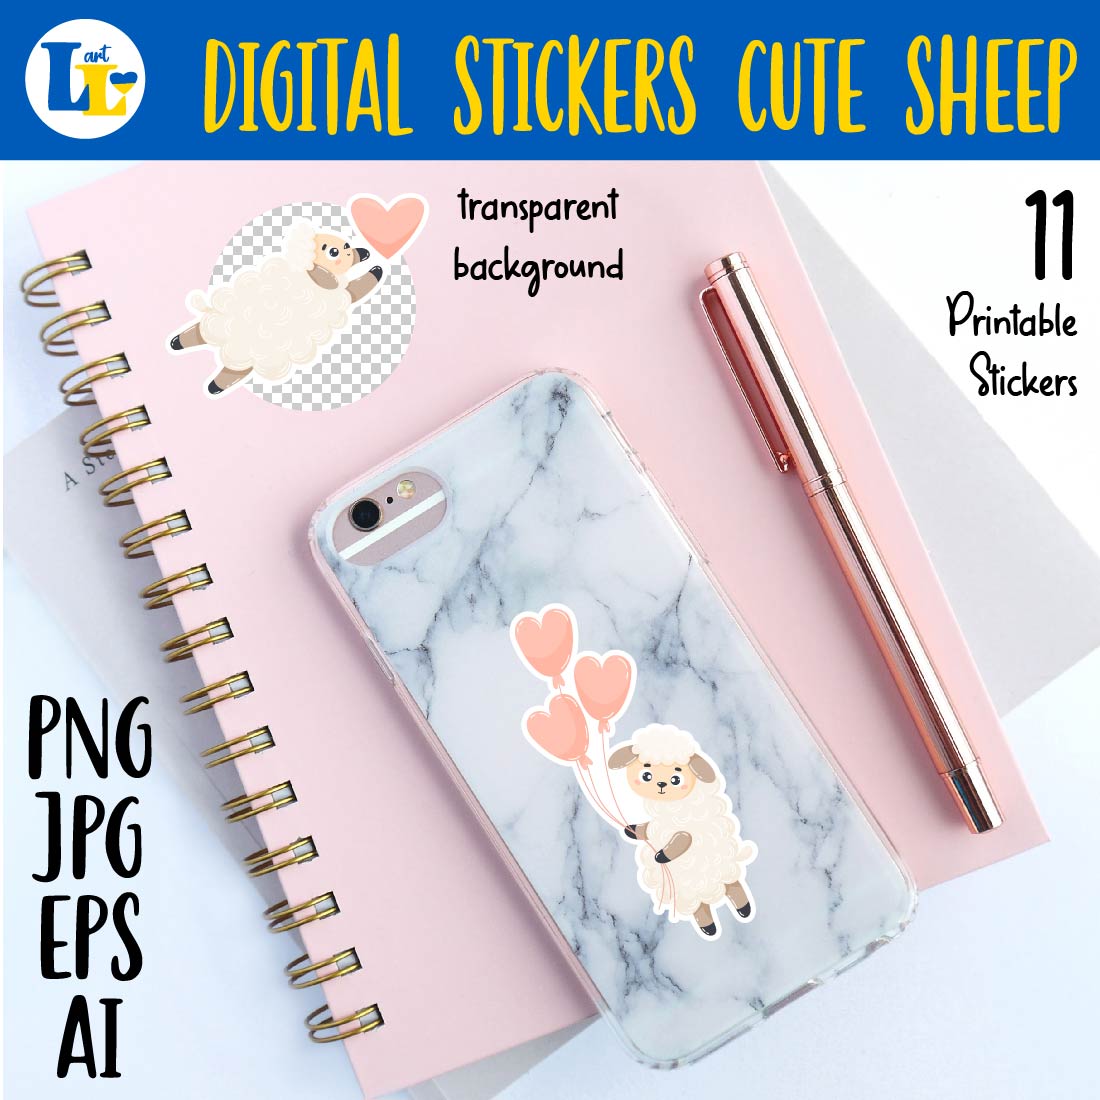 Cute sheep in love stickers bundle | 11 Printable digital sticker valentine preview image.